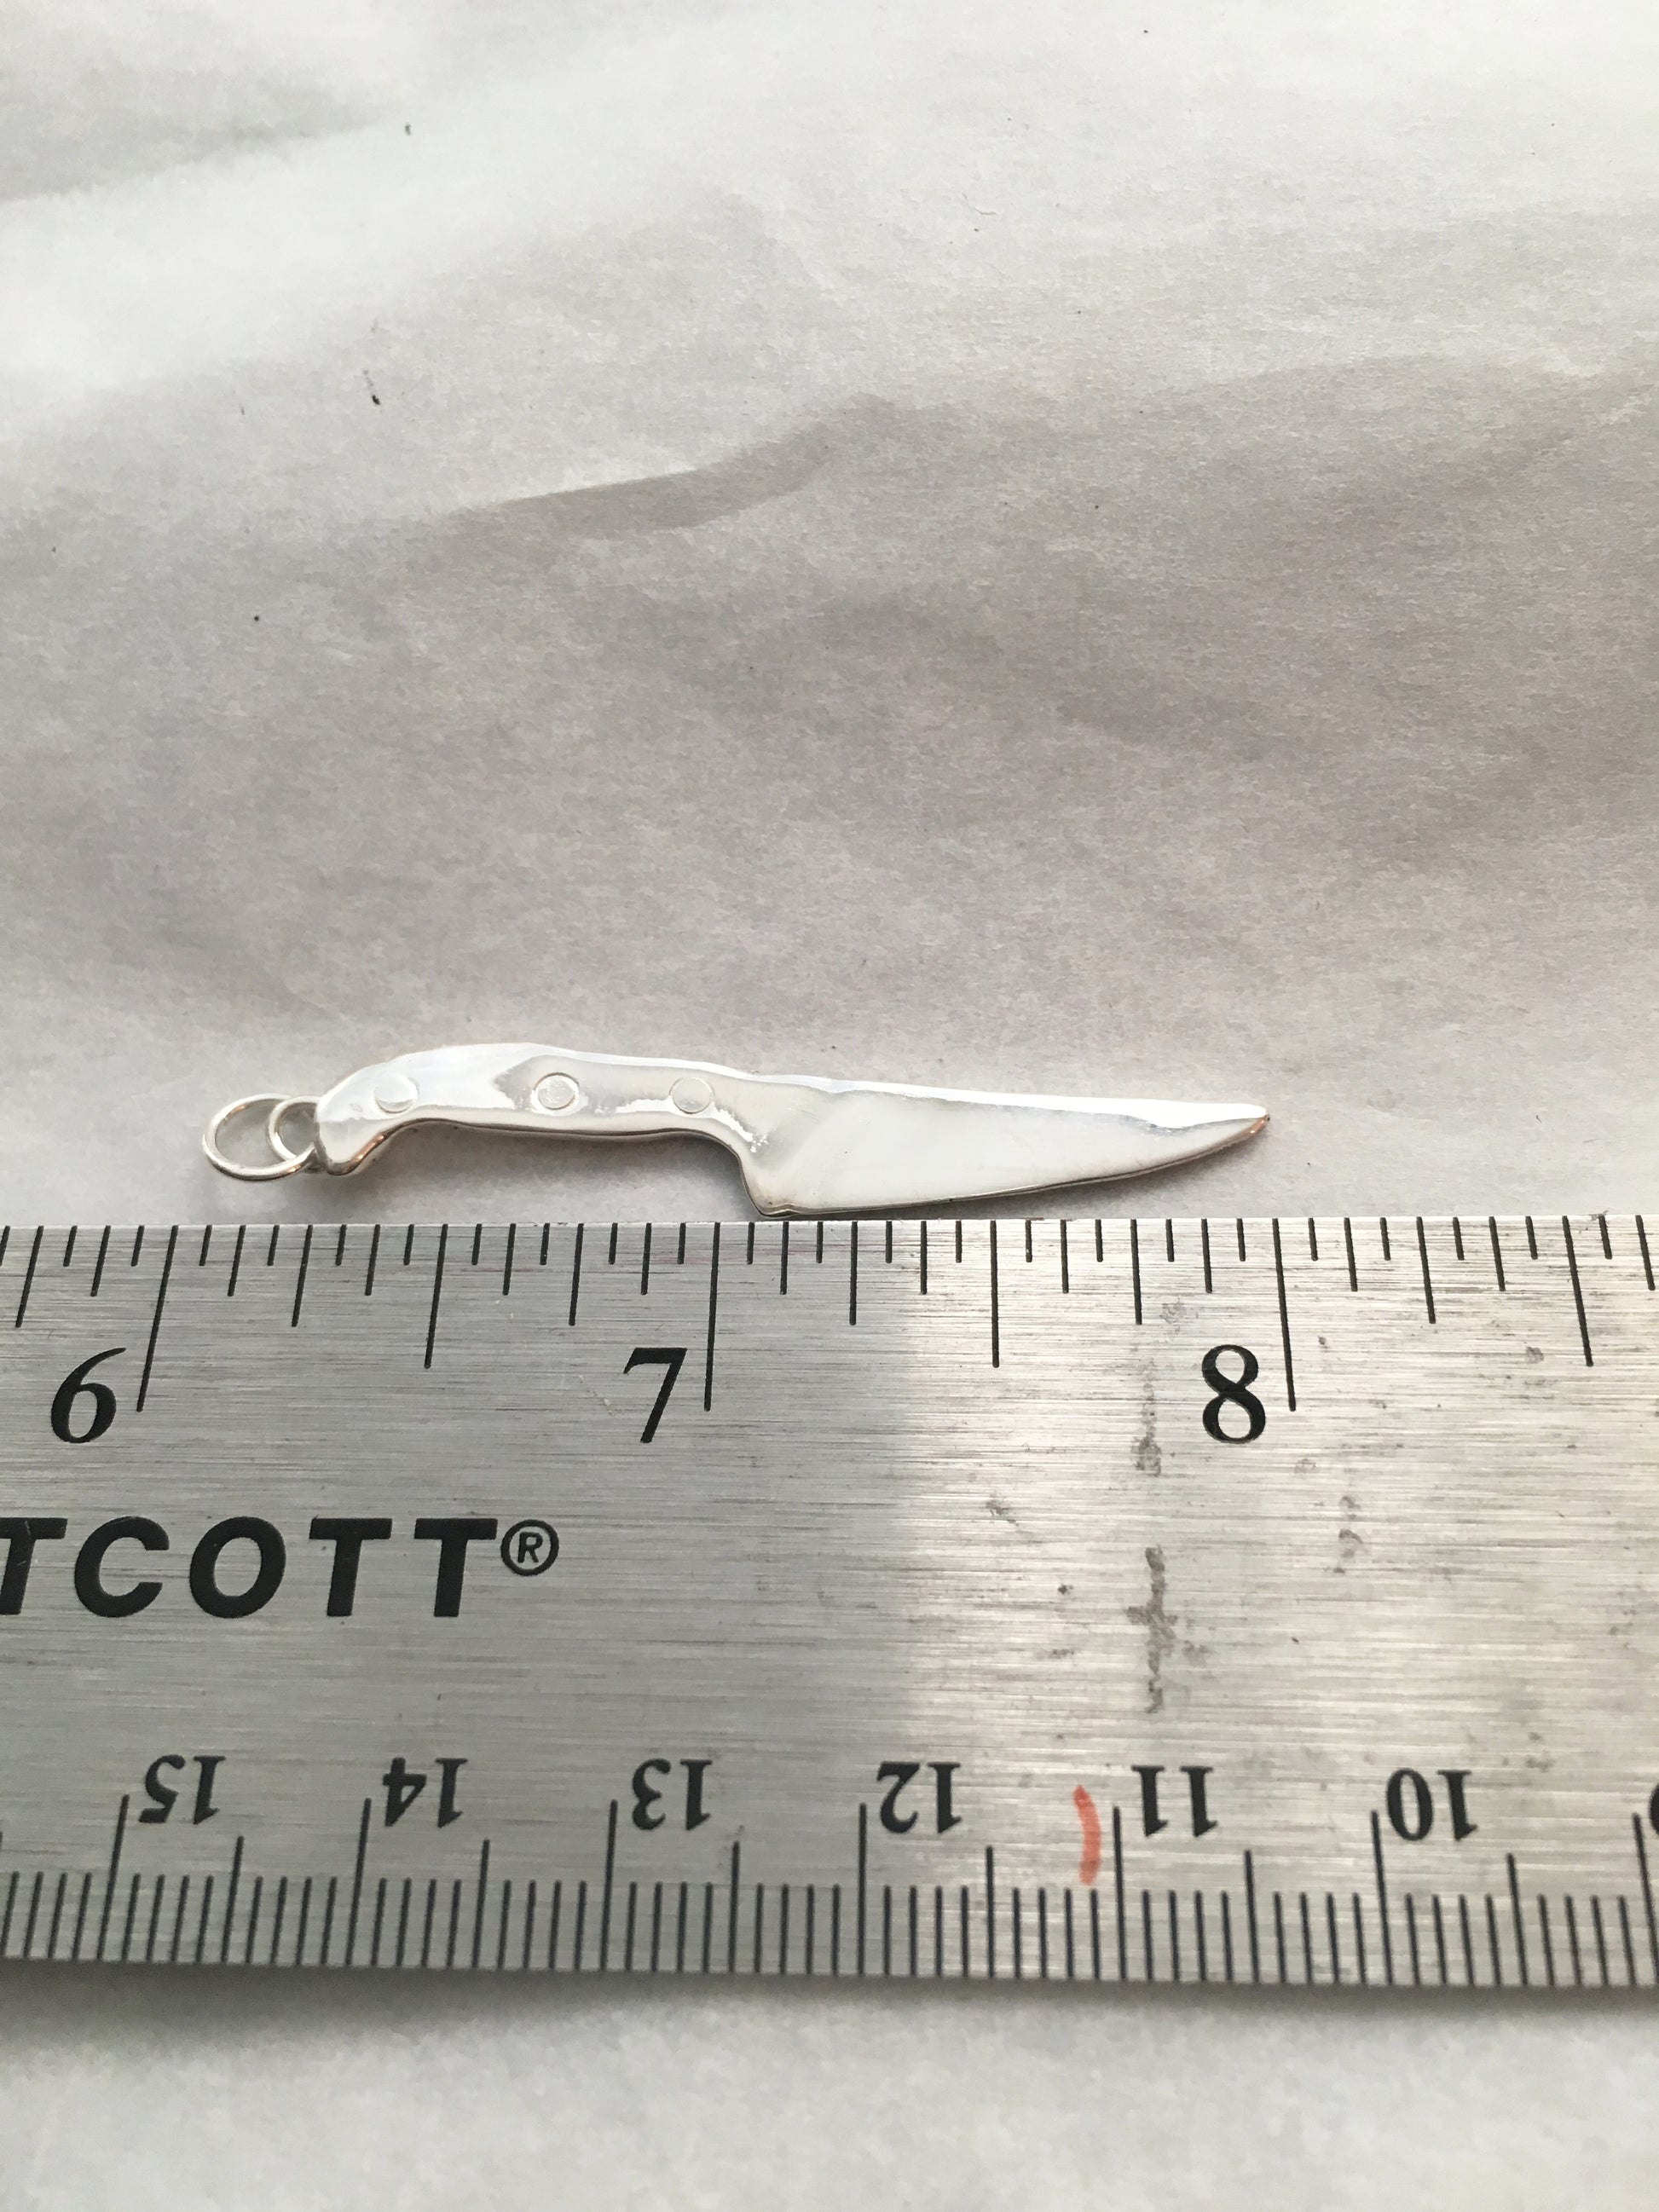 Jumbo chef knife charm measuring about 2 inches